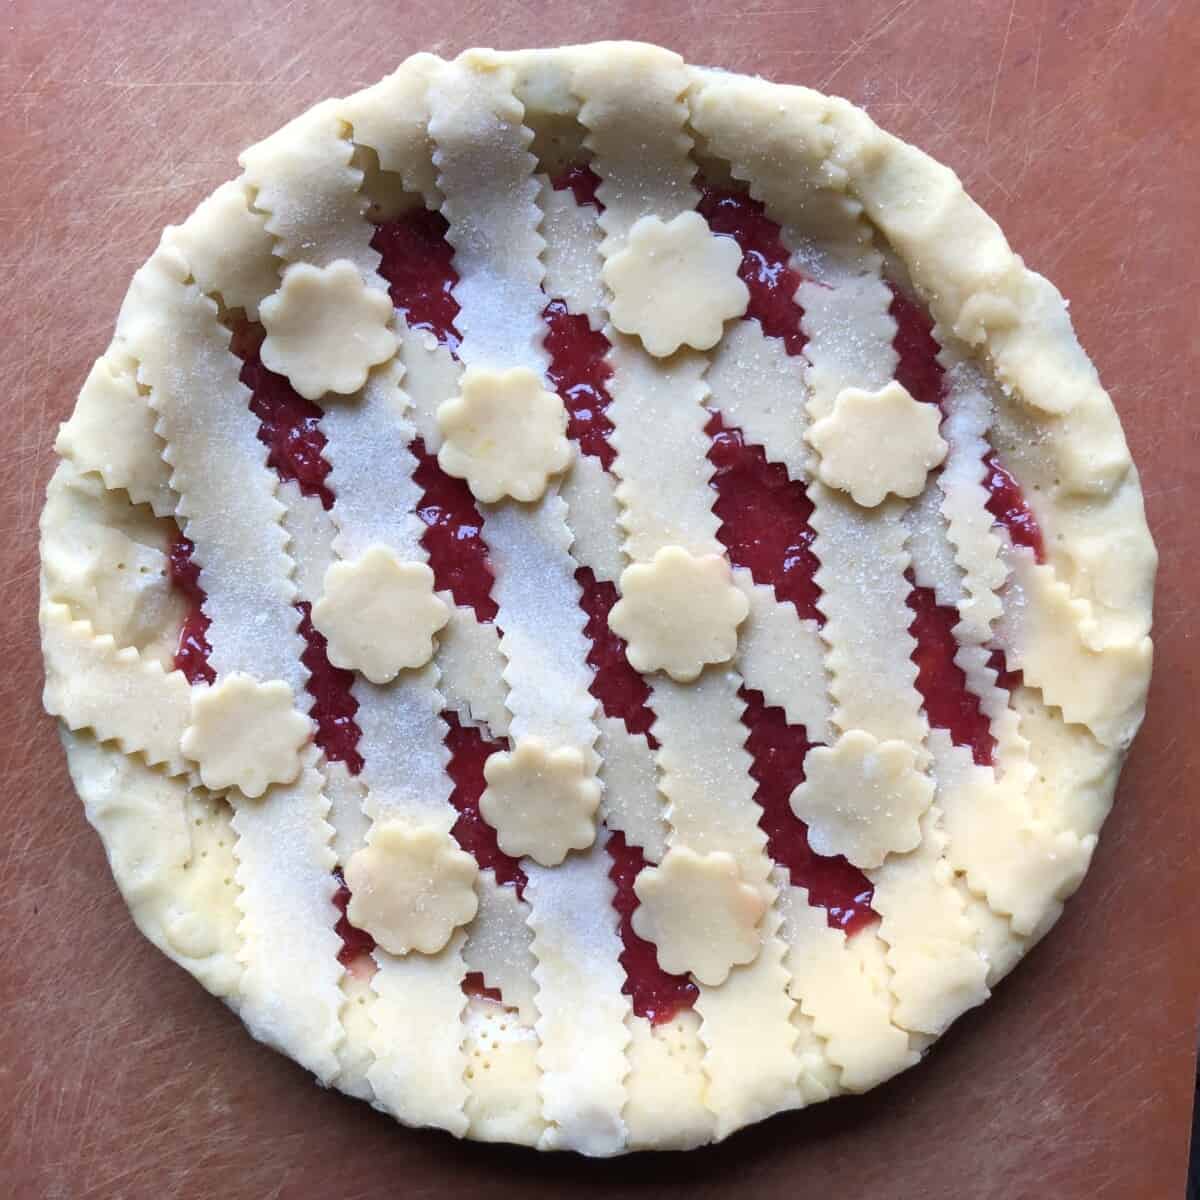 zigzagged edged lattice top covered strawberry jam crostata in a diamond pattern and scalloped circles on top